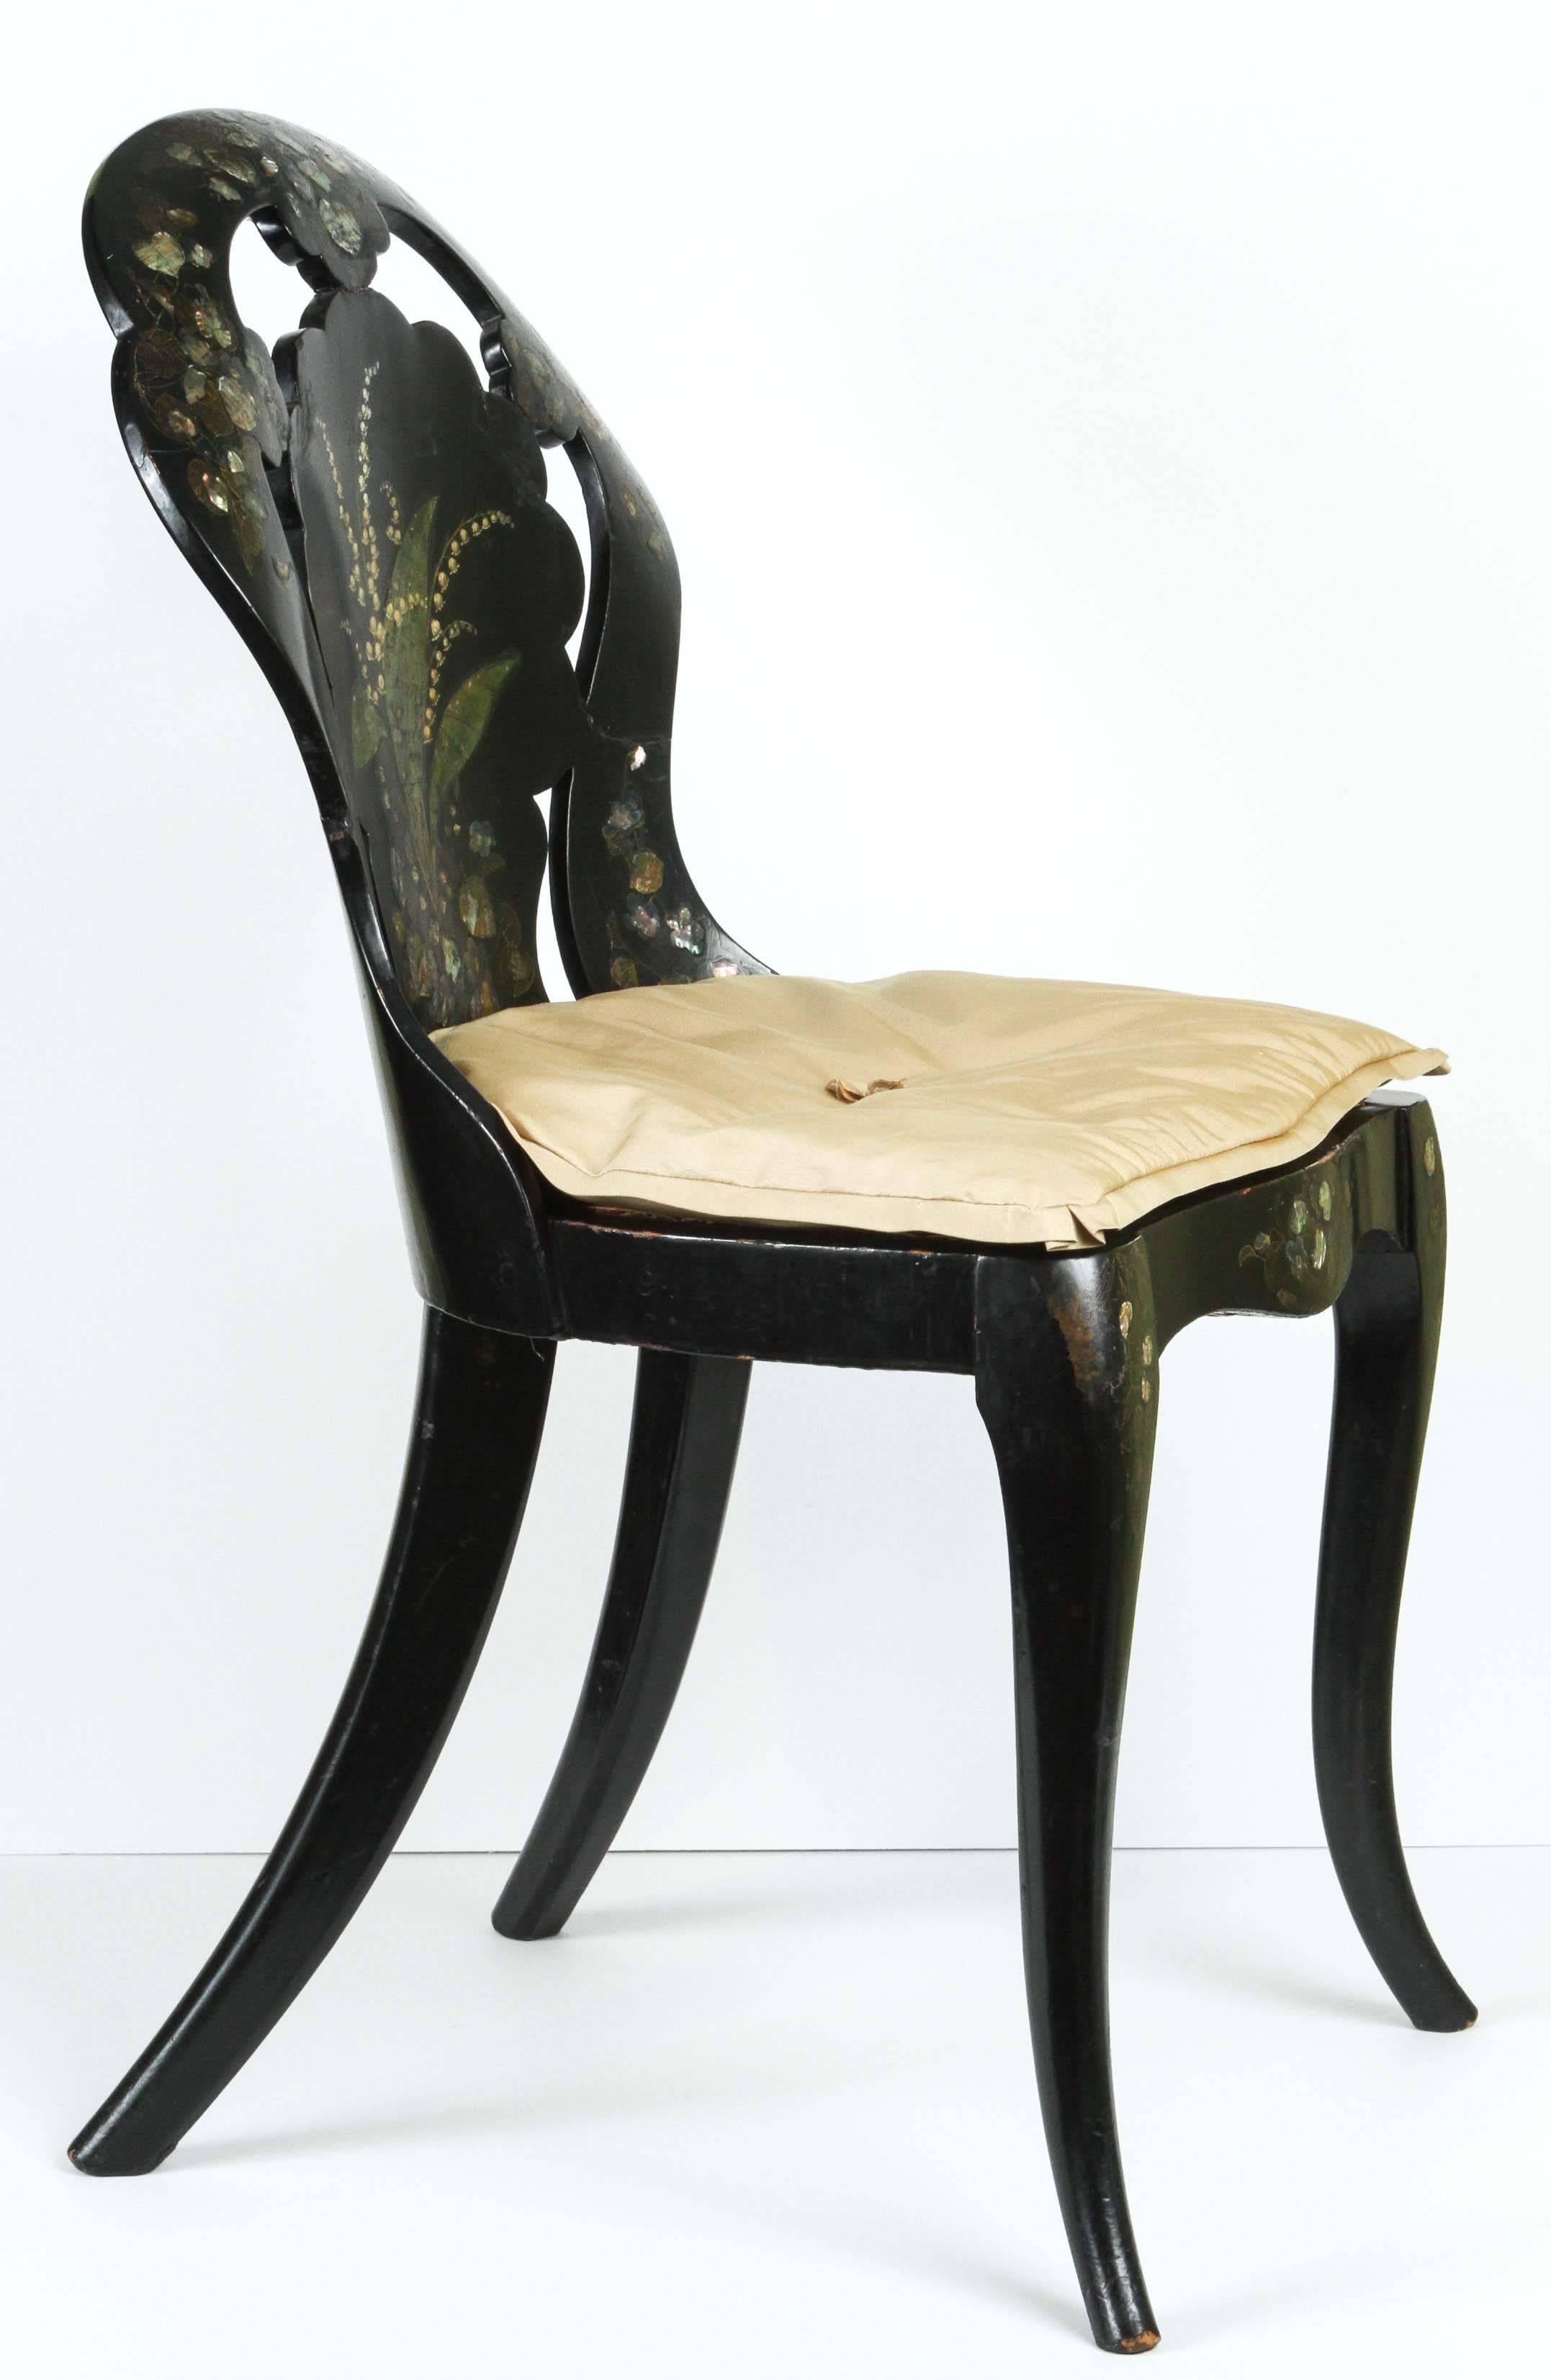 Victorian A Papier-Mache Chair in Black Lacquer with Mother of Pearl Inlay, circa 1850